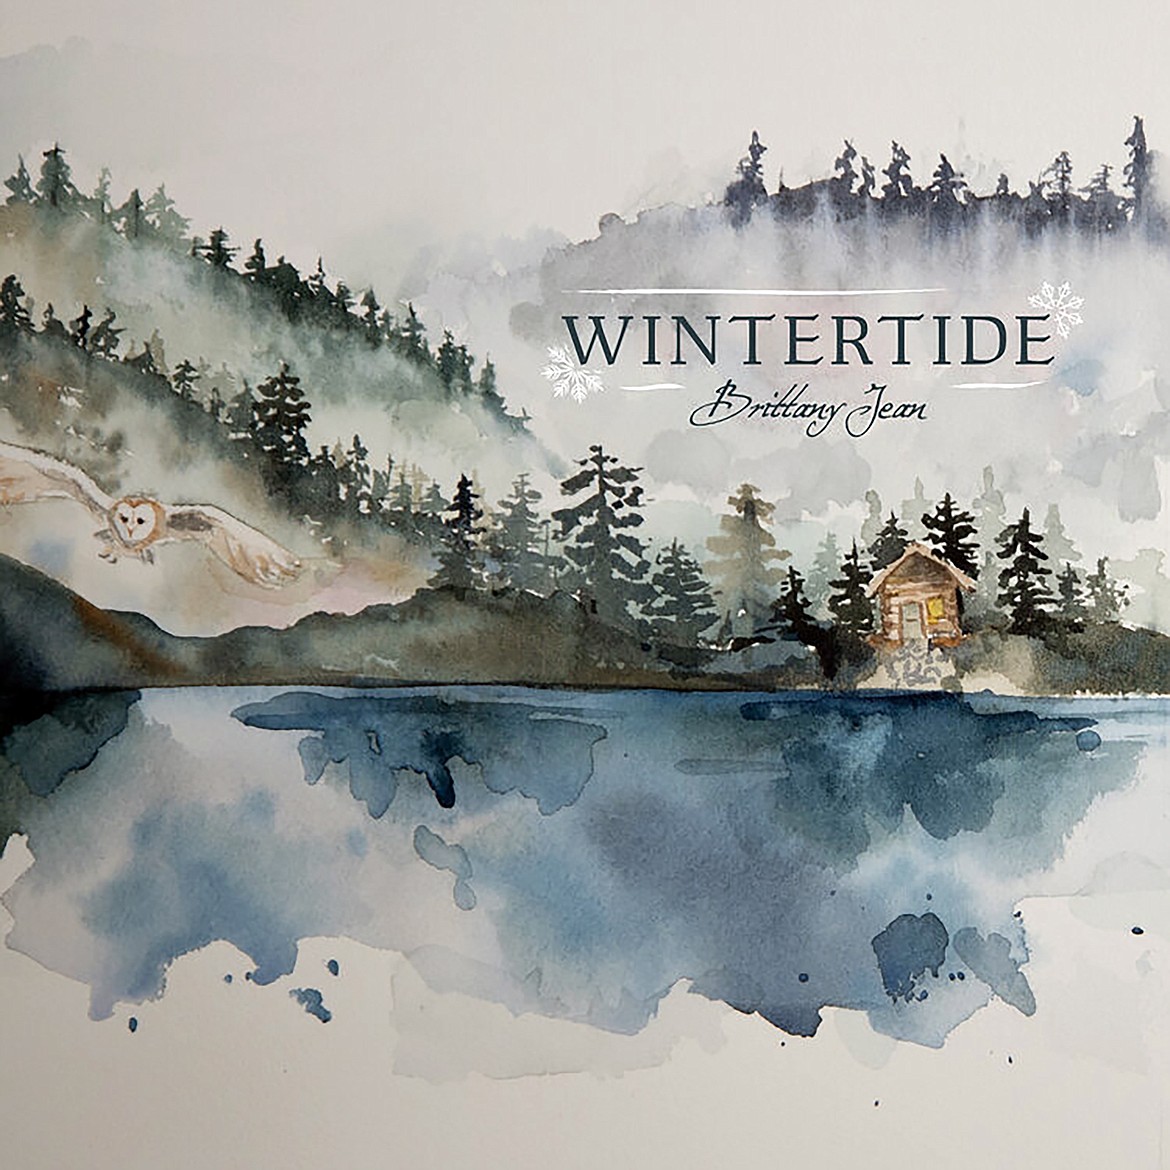 The cover of Brittany Jean's Christmas album, "Wintertide".